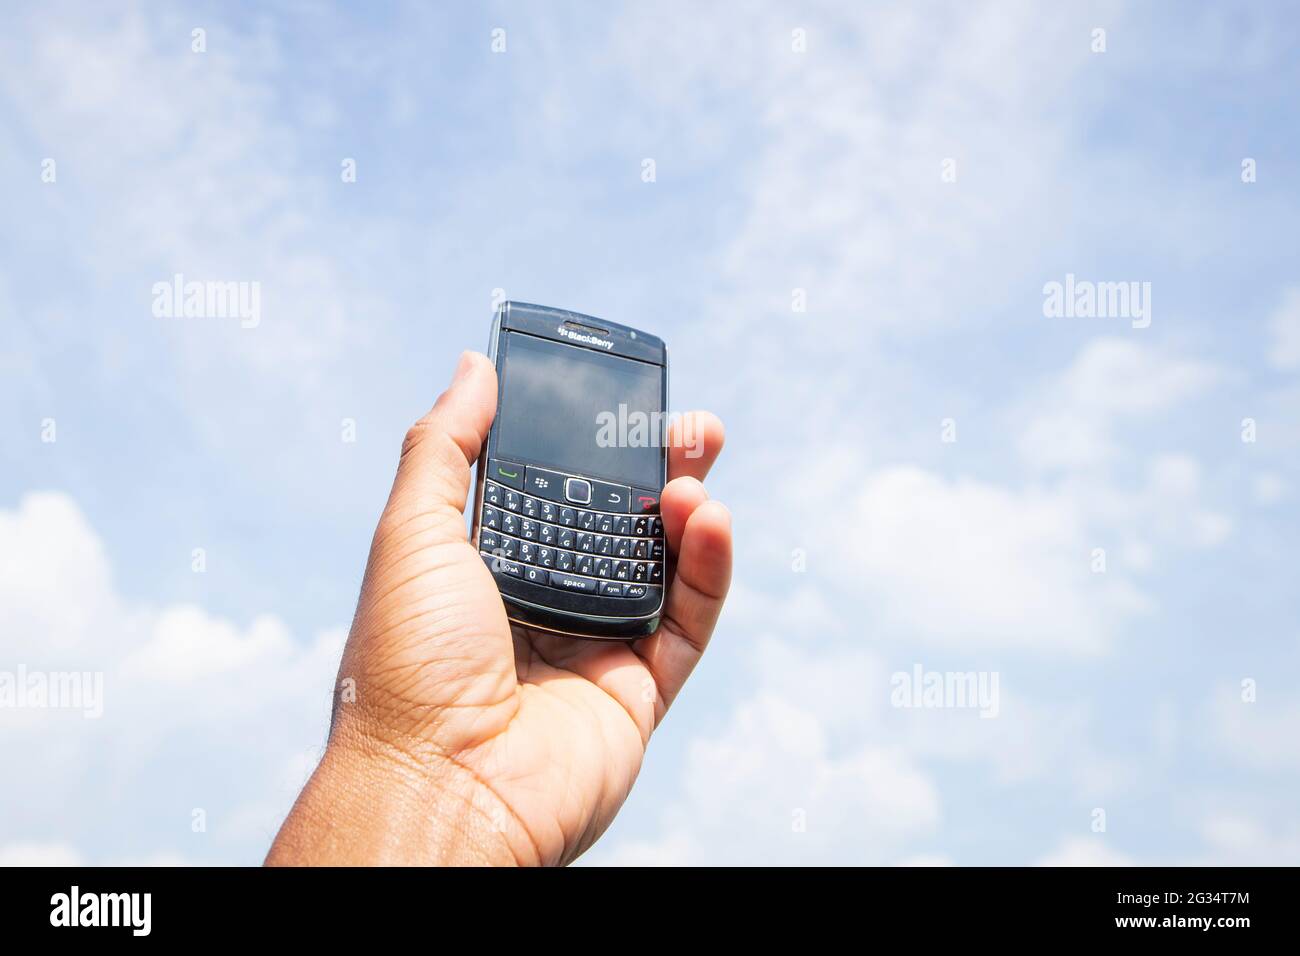 A hand is holding an outdated Blackberry smartphone up to the sky. Stock Photo